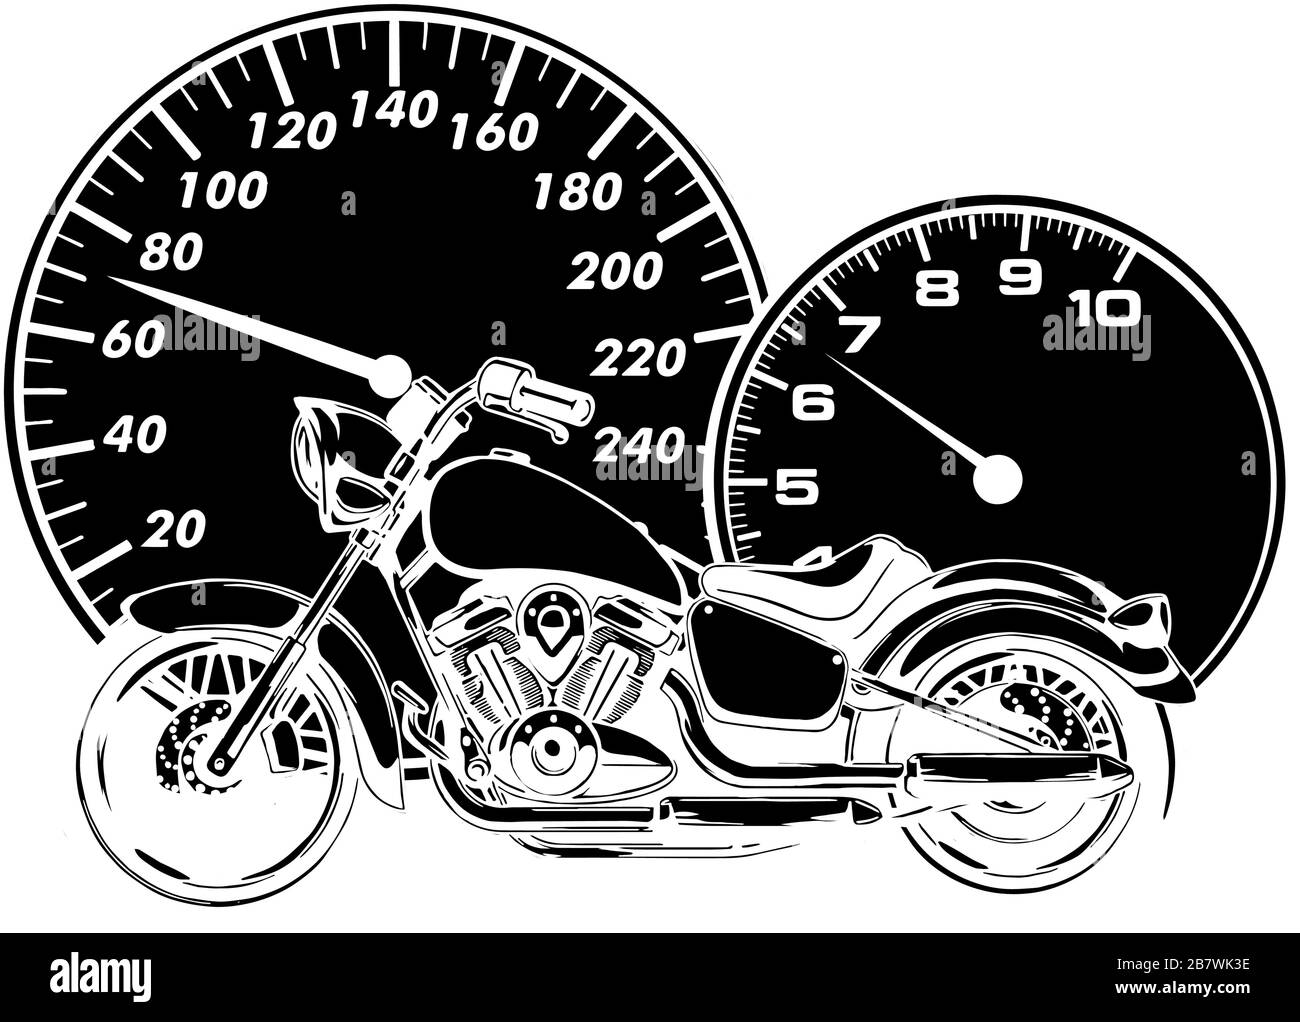 vector illustration Flaming Bike Chopper Ride Front View Stock Vector